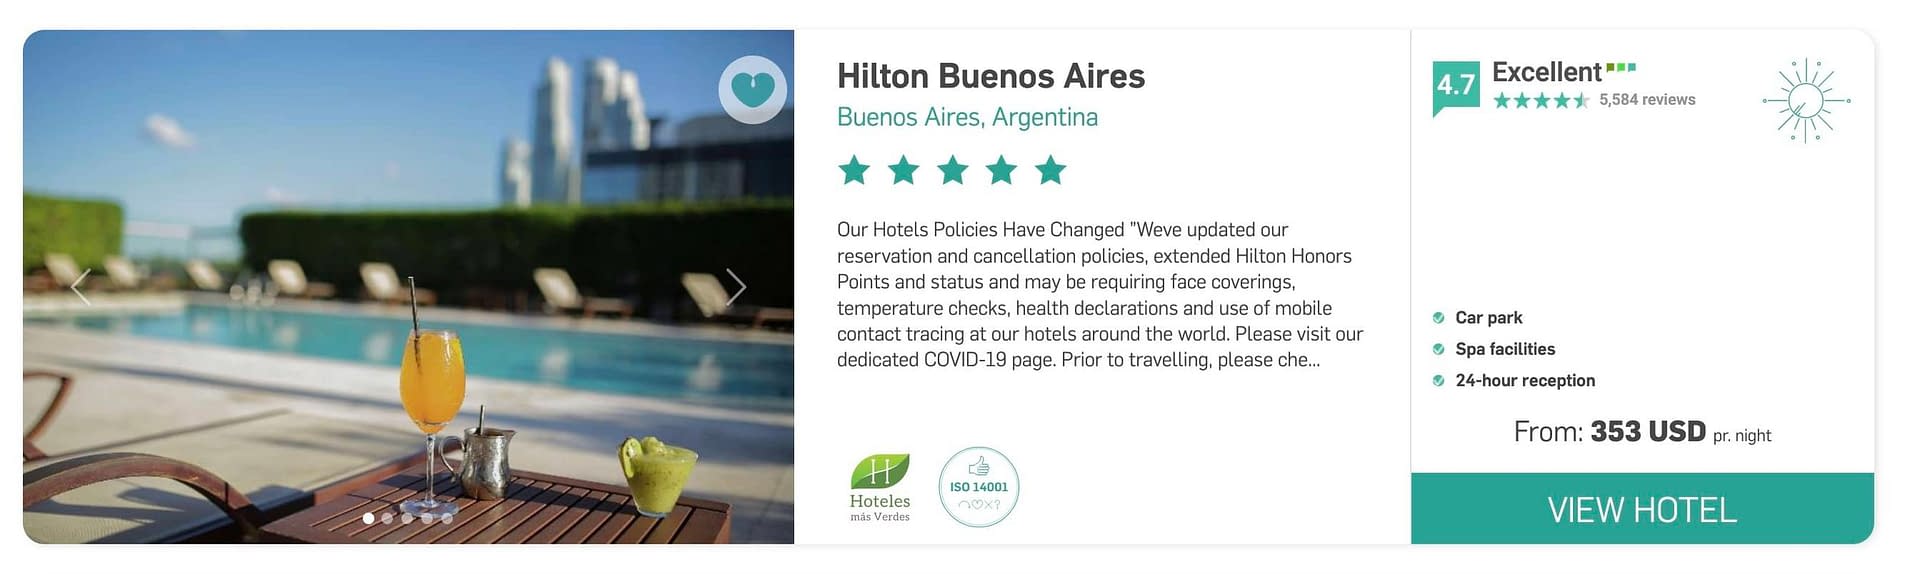 Hilton Buenos Aires on EcoHotels.com